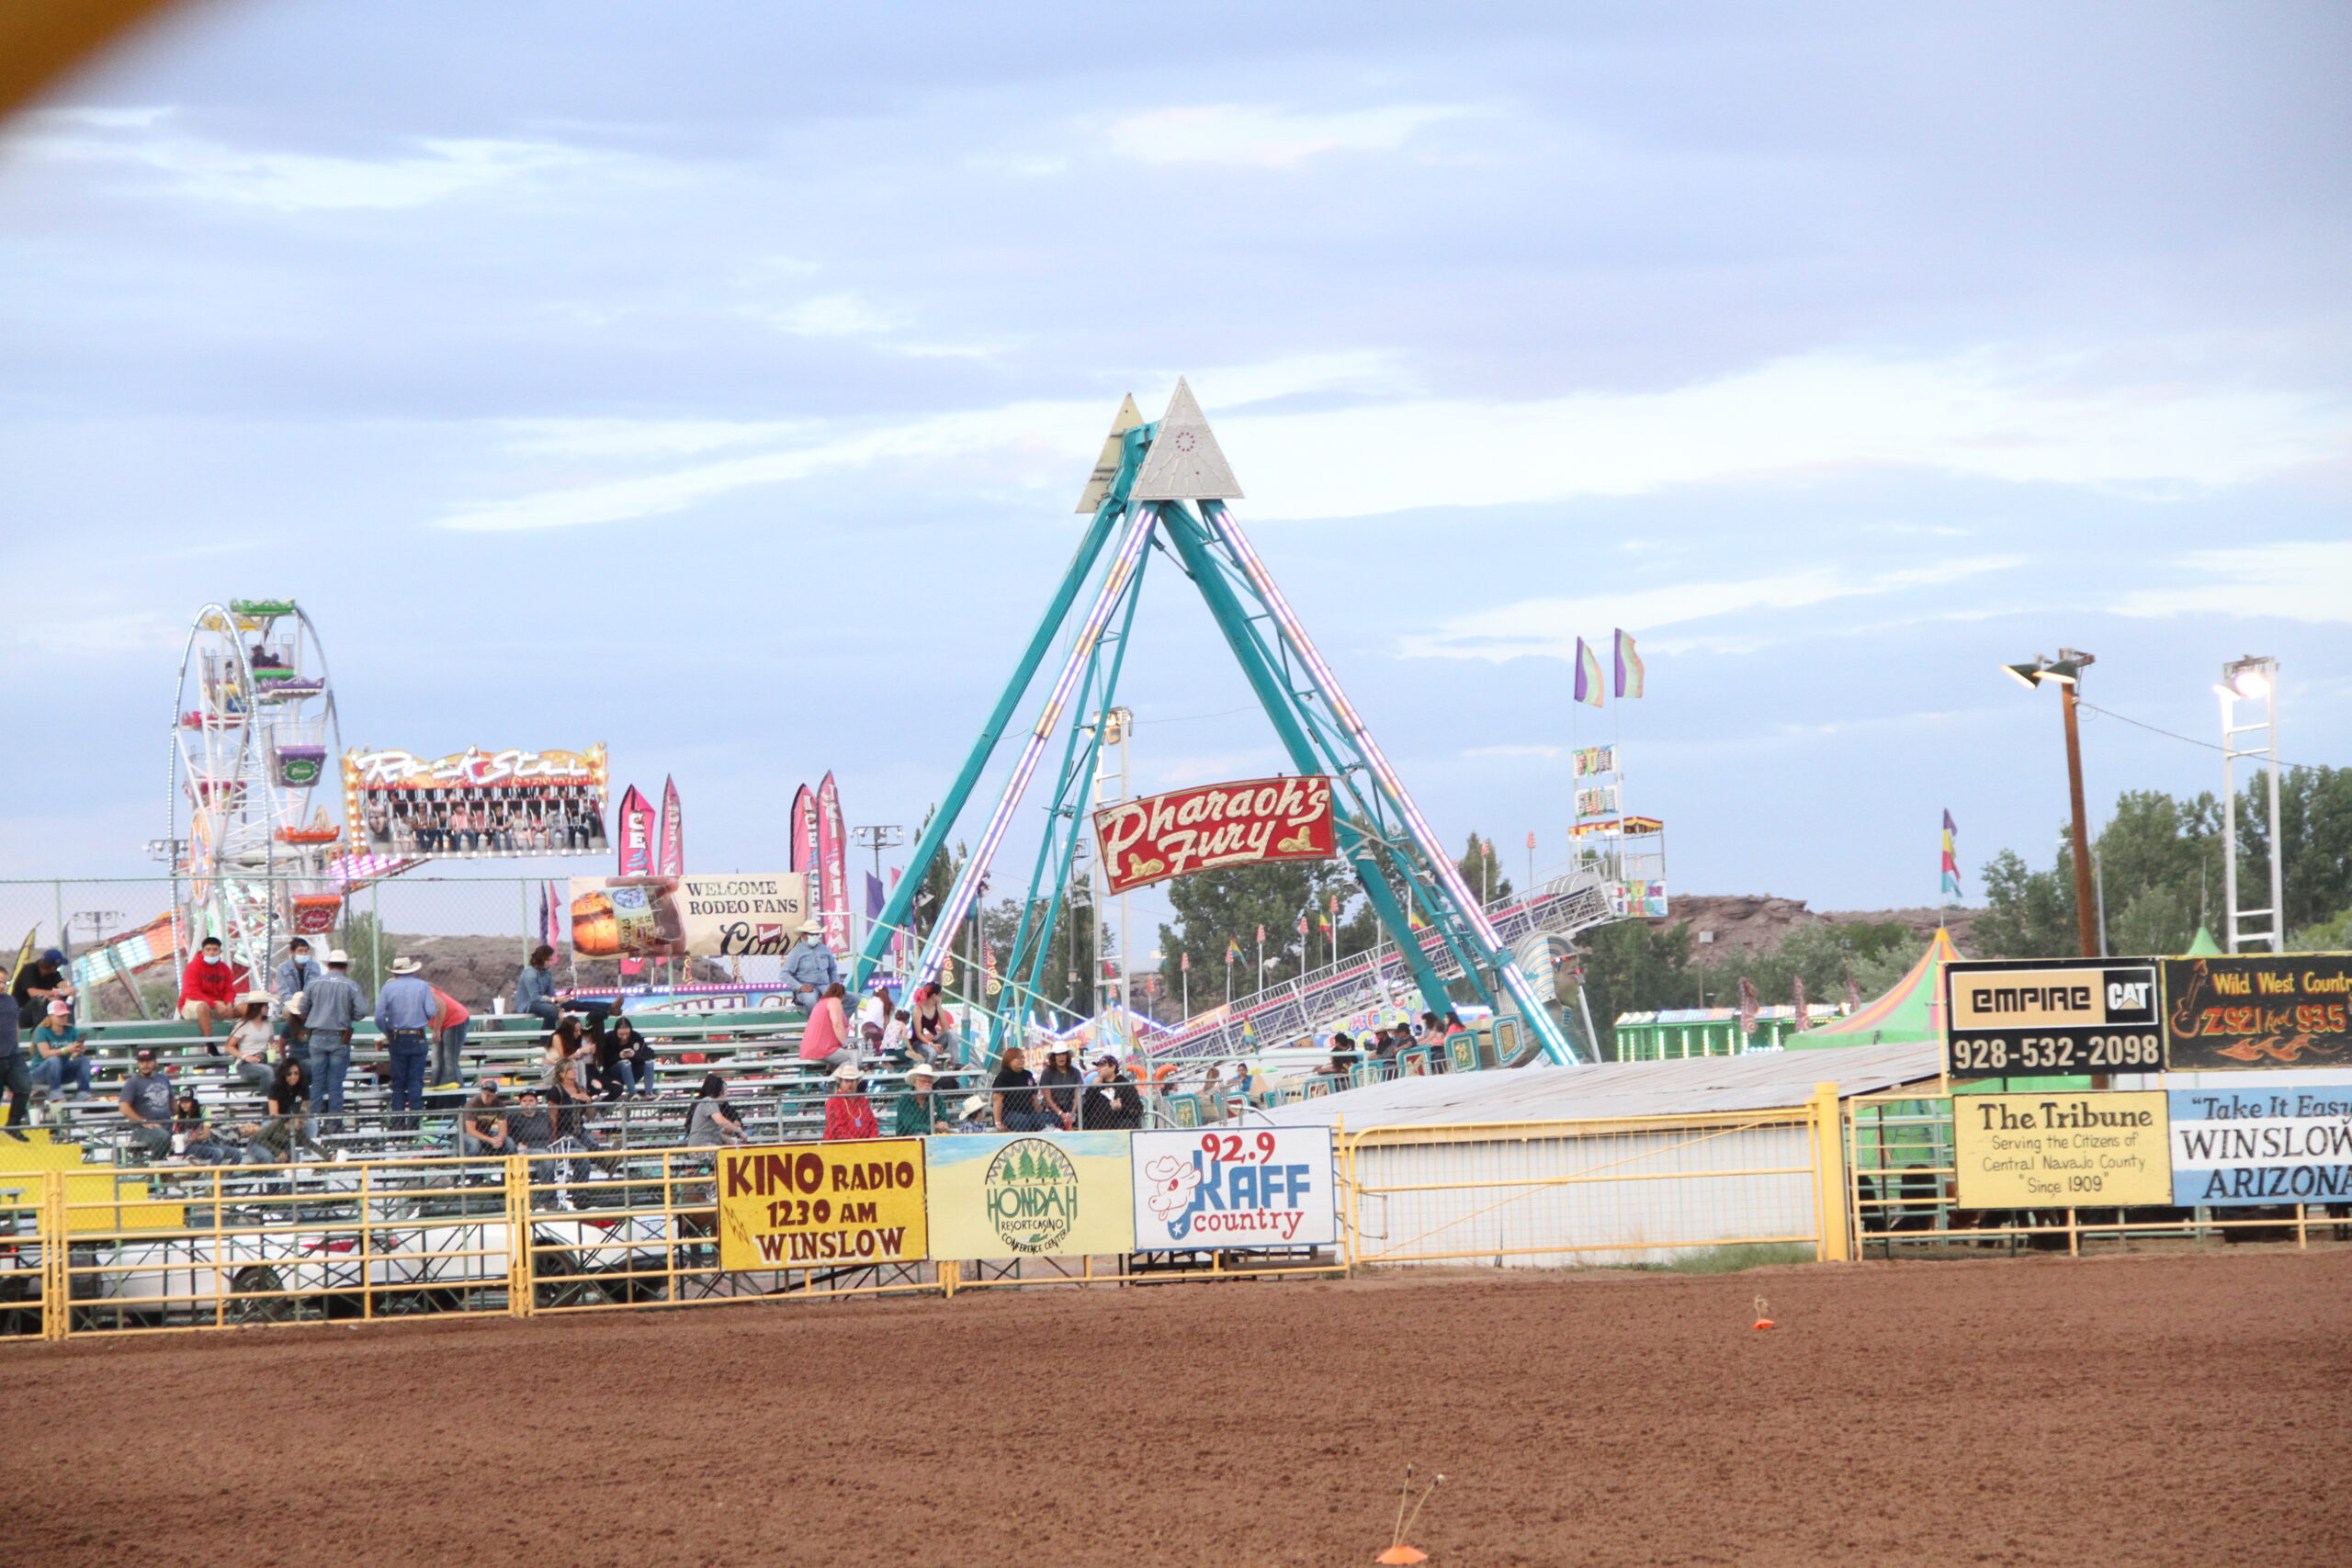 Save the Date for the Navajo County Fair & Rodeo 2022!